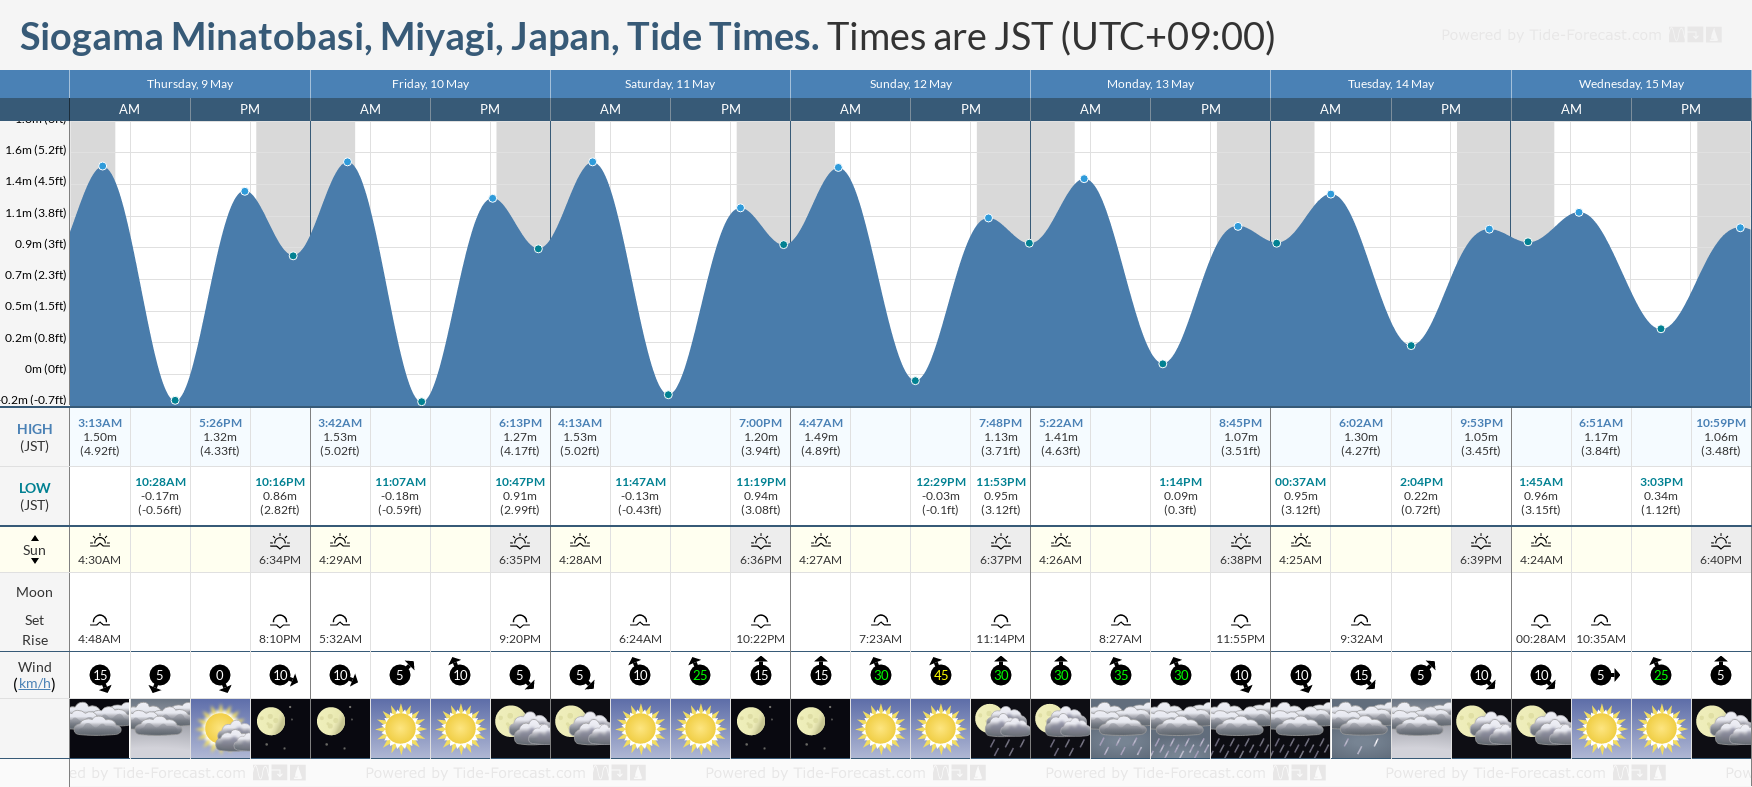 Siogama Minatobasi, Miyagi, Japan Tide Chart including high and low tide tide times for the next 7 days